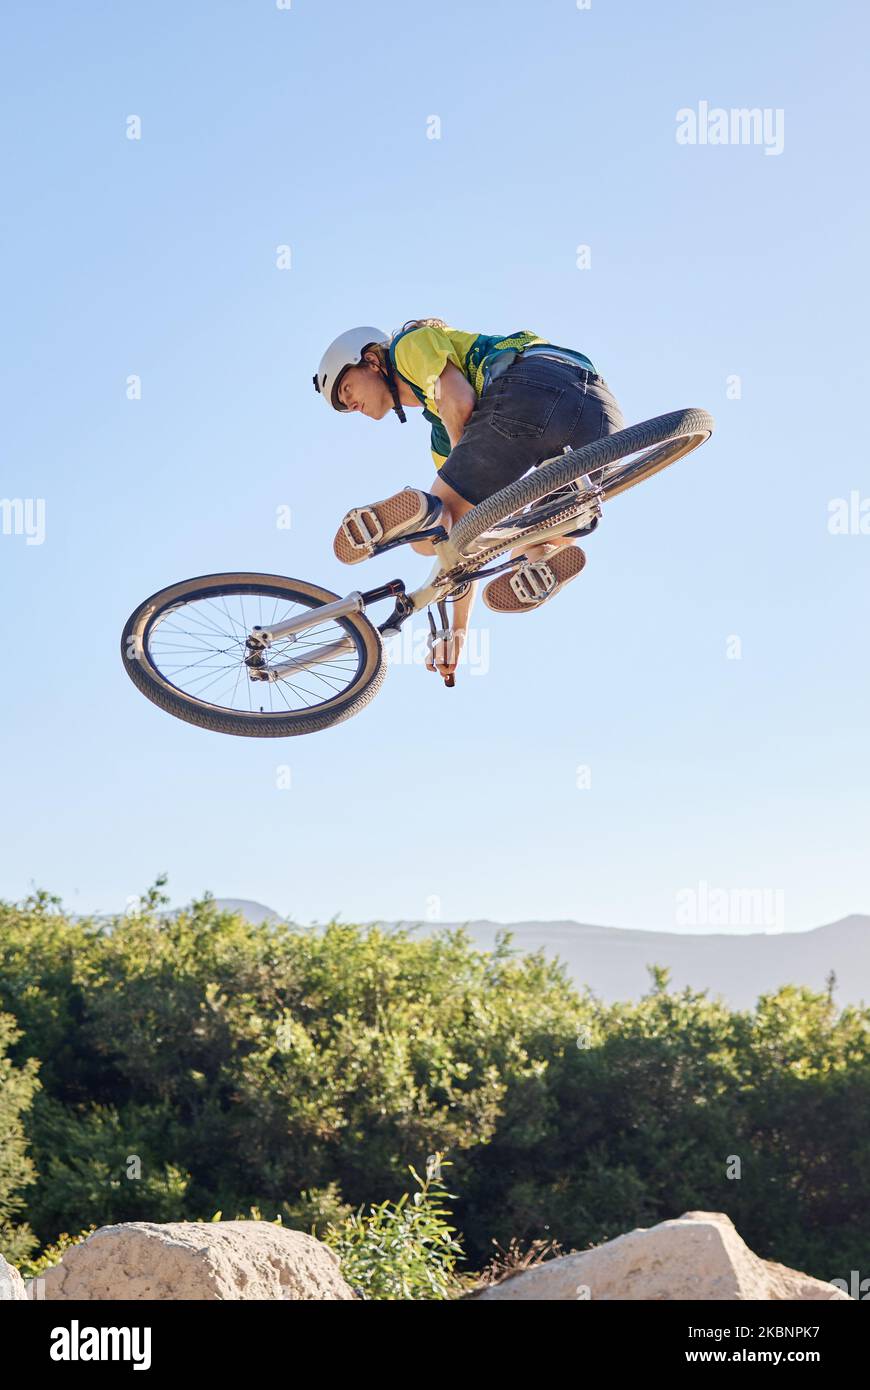 Bike, extreme sport and outdoor fitness, man does dangerous stunt, sports motivation and training in nature. Exercise, athlete with mountain bike Stock Photo